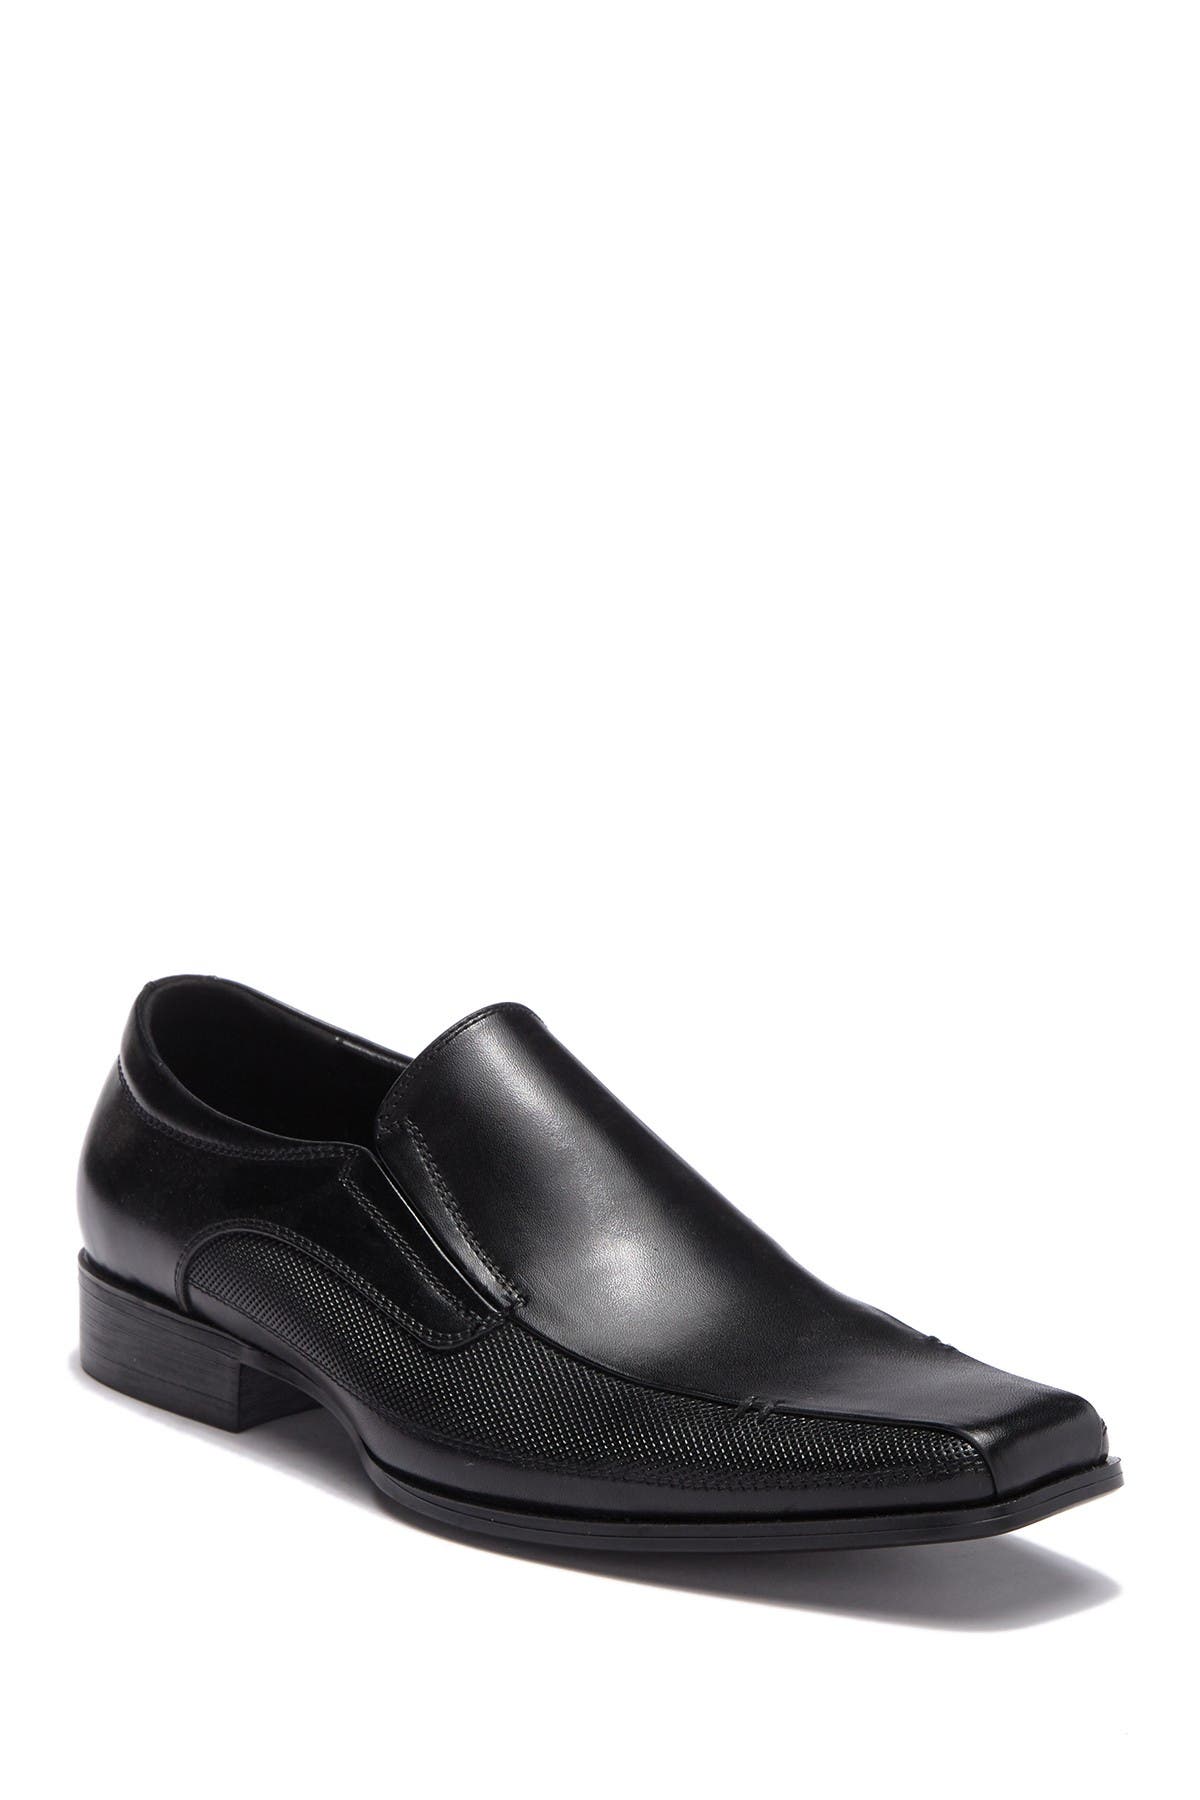 kenneth cole reaction square toe shoes